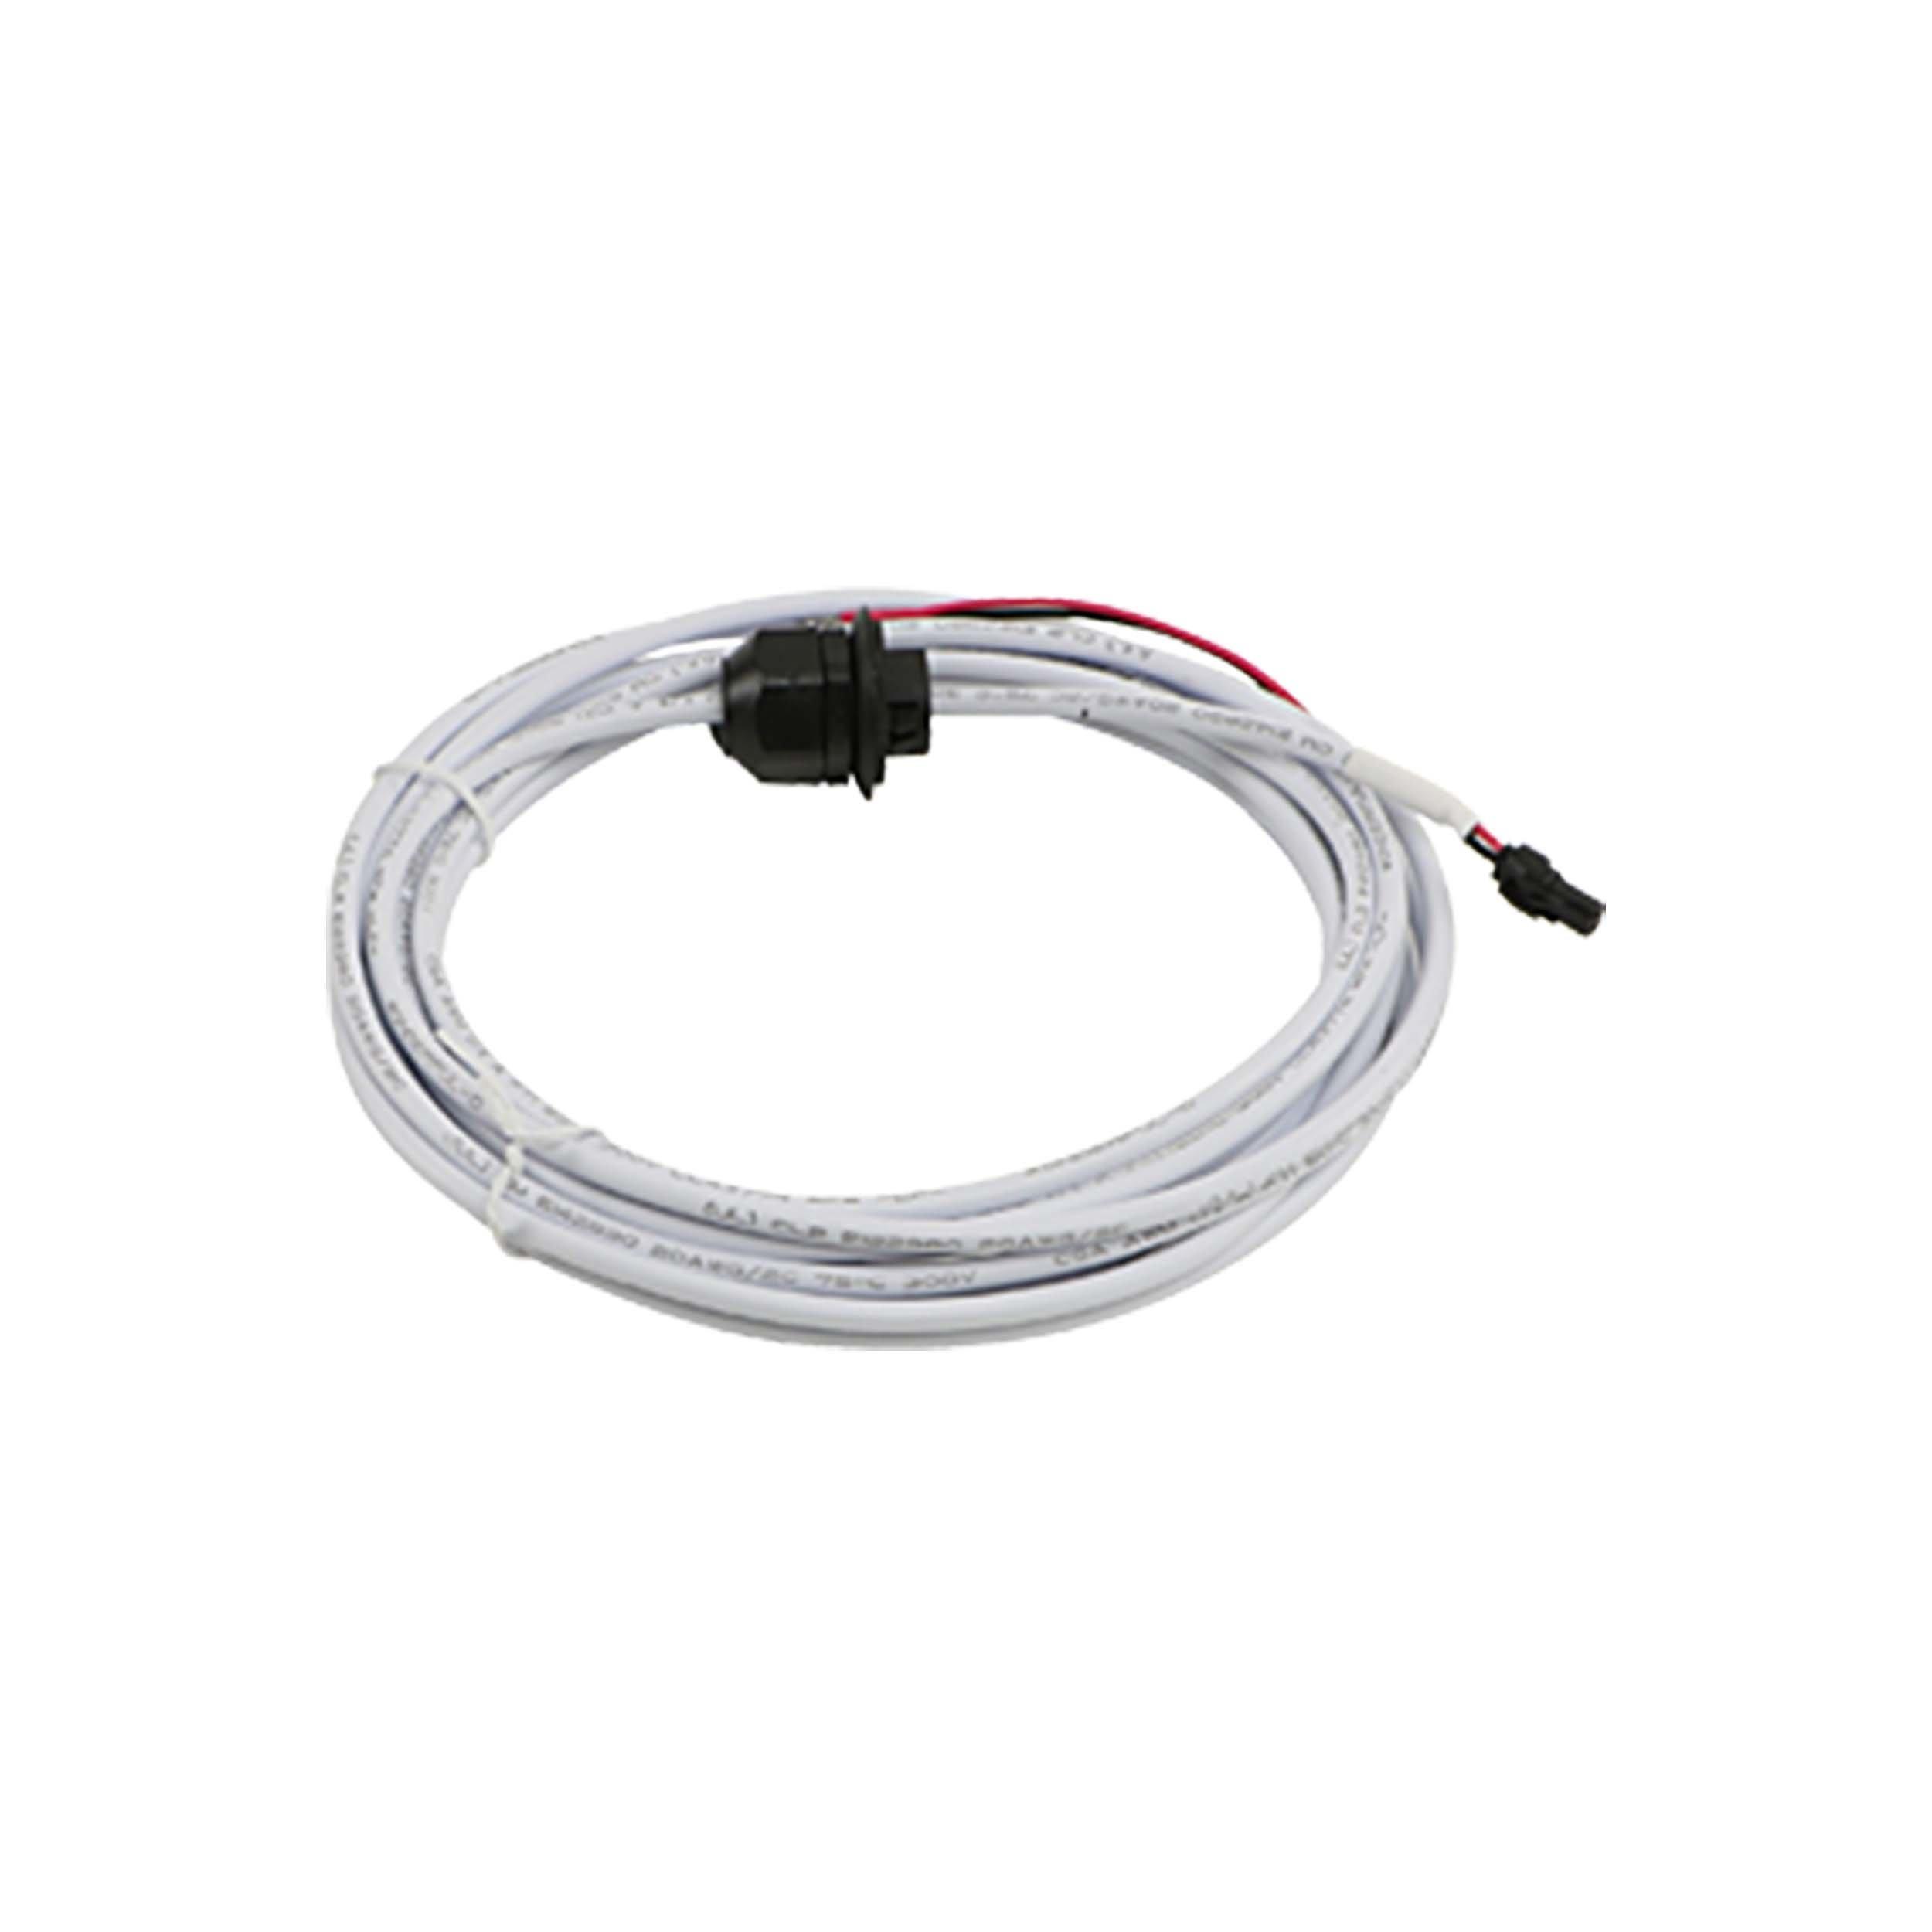 Schluter Liprotec-CW 49ft. Cable